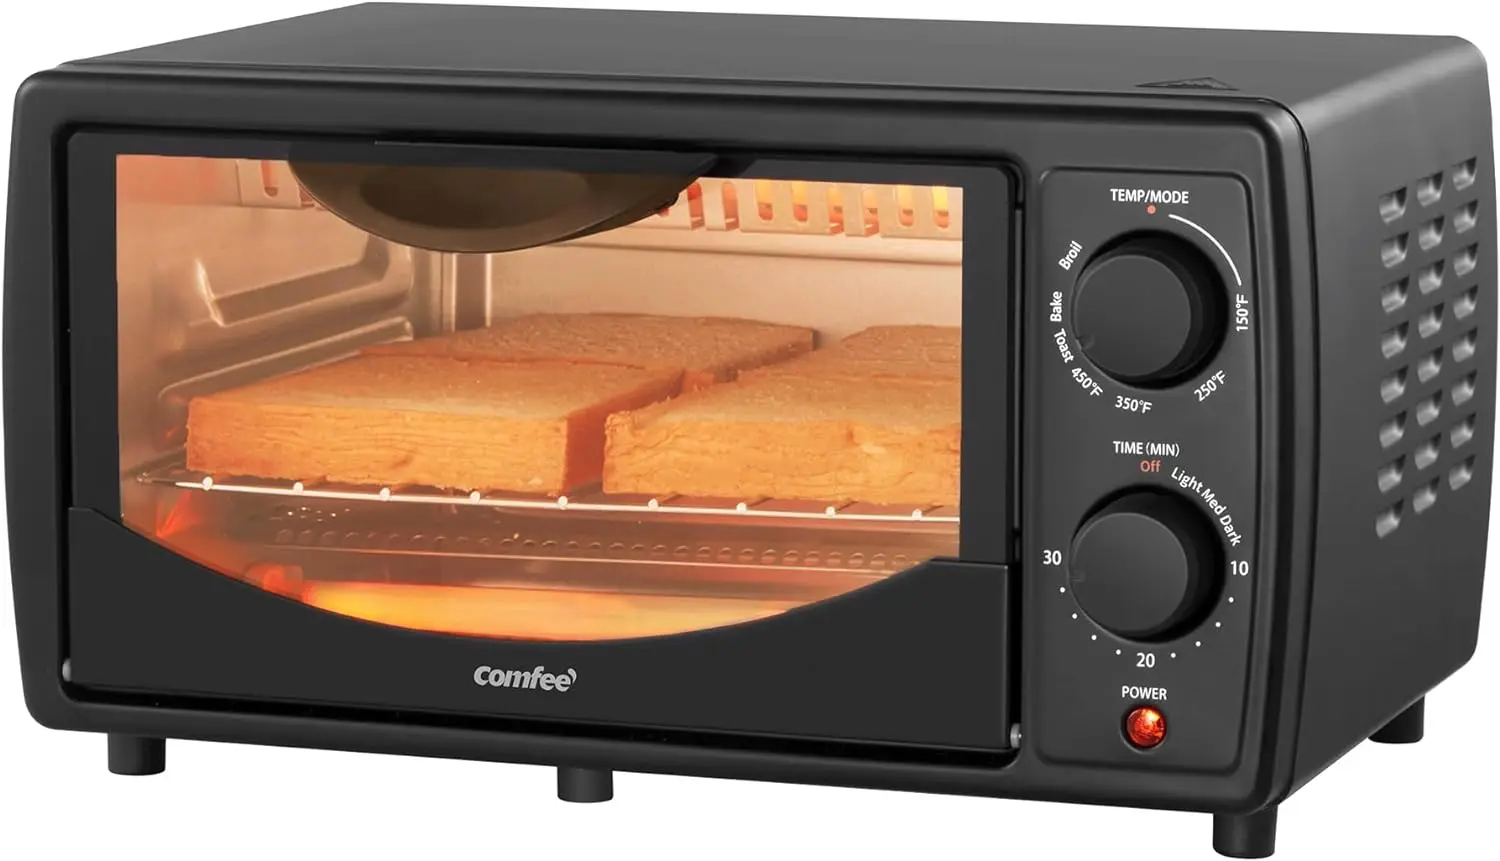 

Toaster Oven Countertop, Small Toaster Ovens Combo 4 slice, Mini Oven for 9" Pizza, Compact Oven 2 Racks